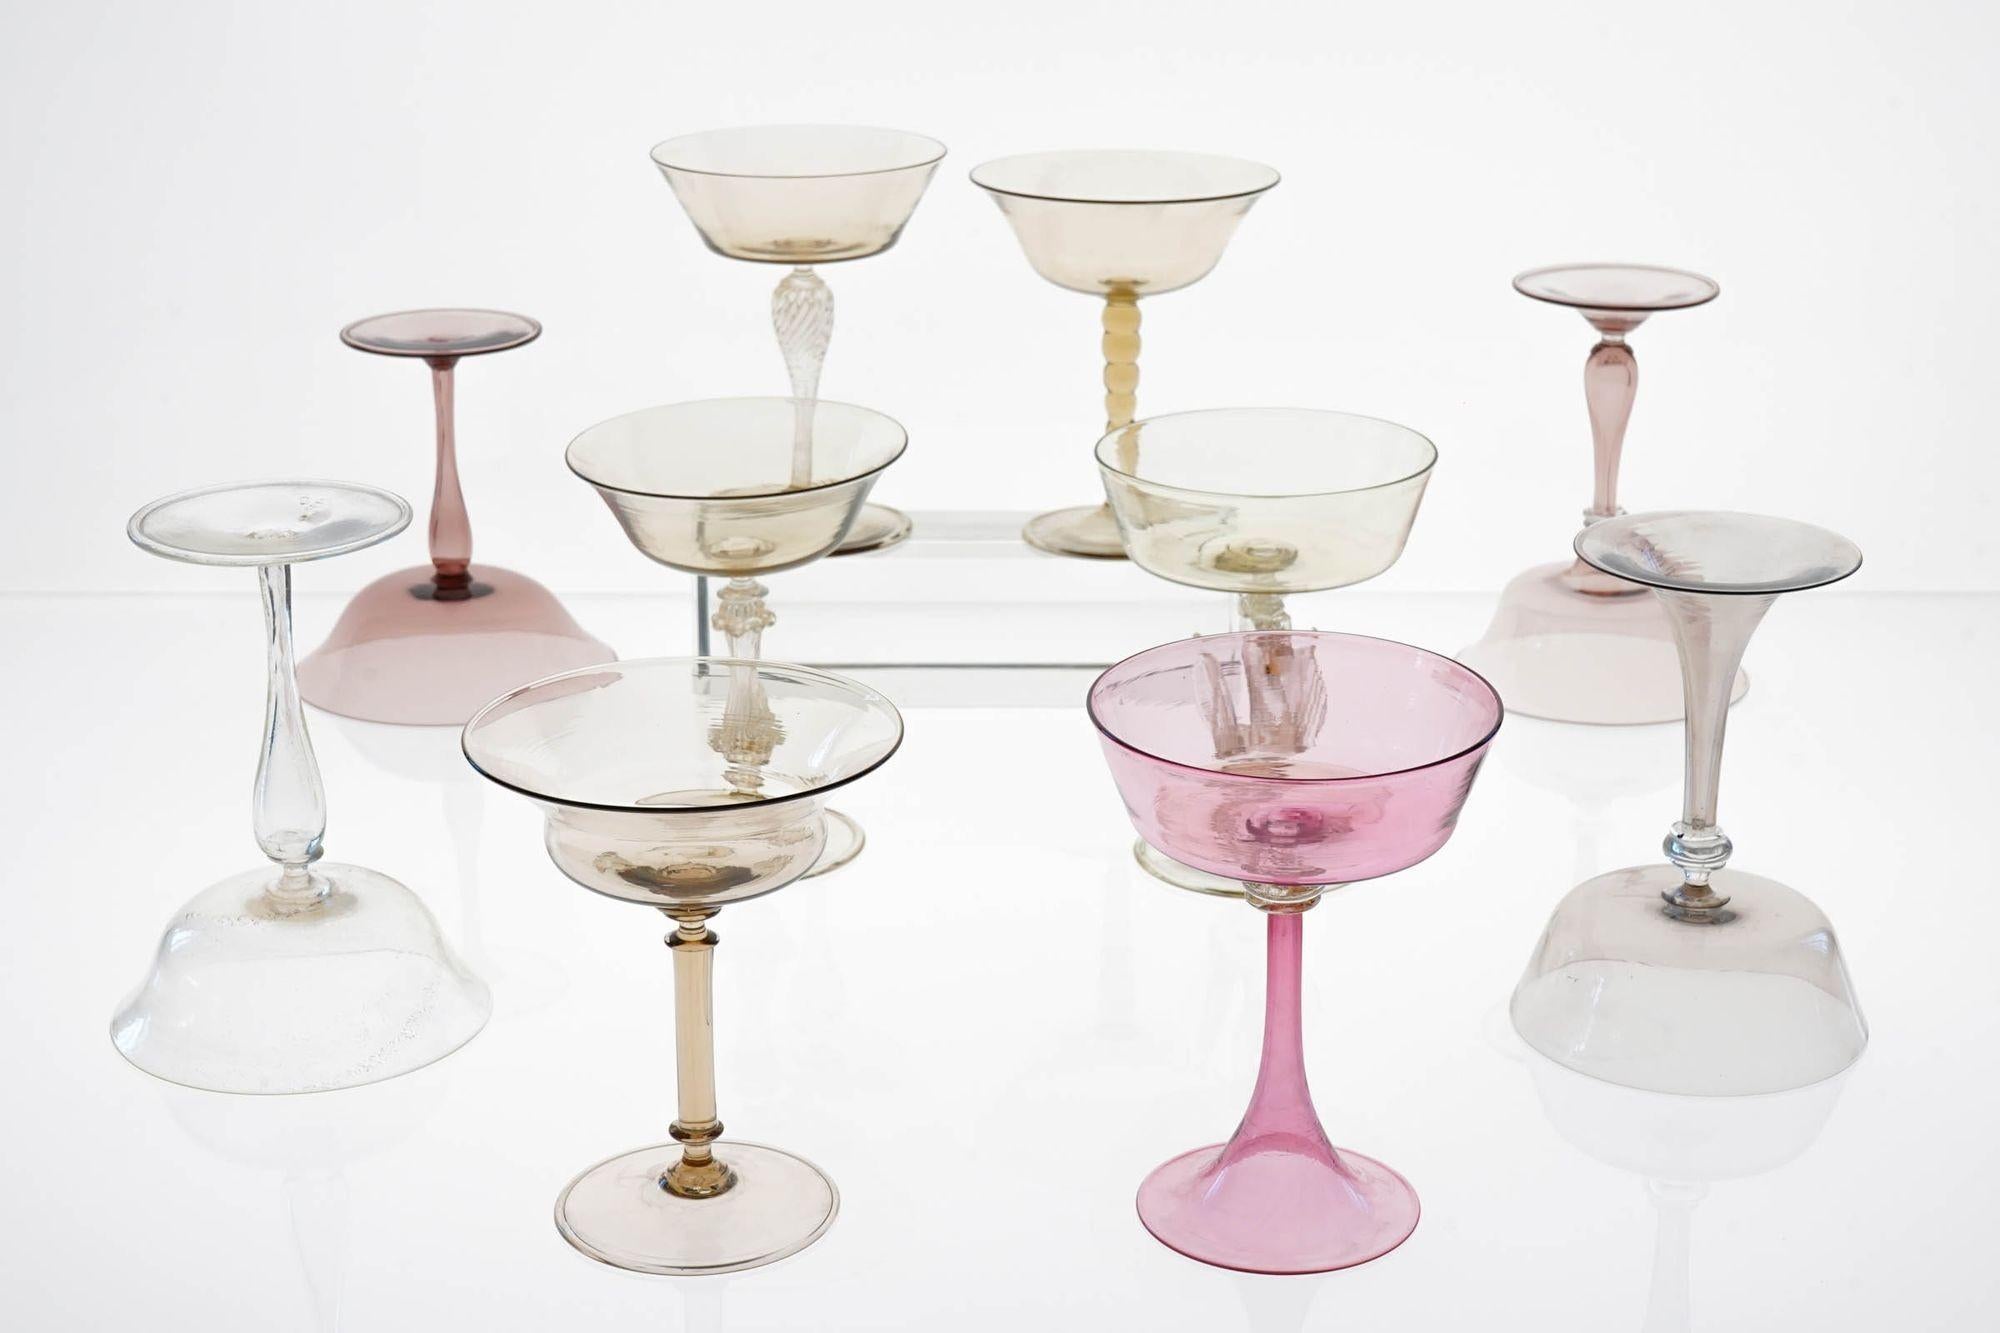 A truly exceptional discovery, these items hail from Amelio Cenedese's personal collection. This collection of one-of-a-kind would easily become the conversation point for an eclectic table setting. Each guest is treated to stemware that is